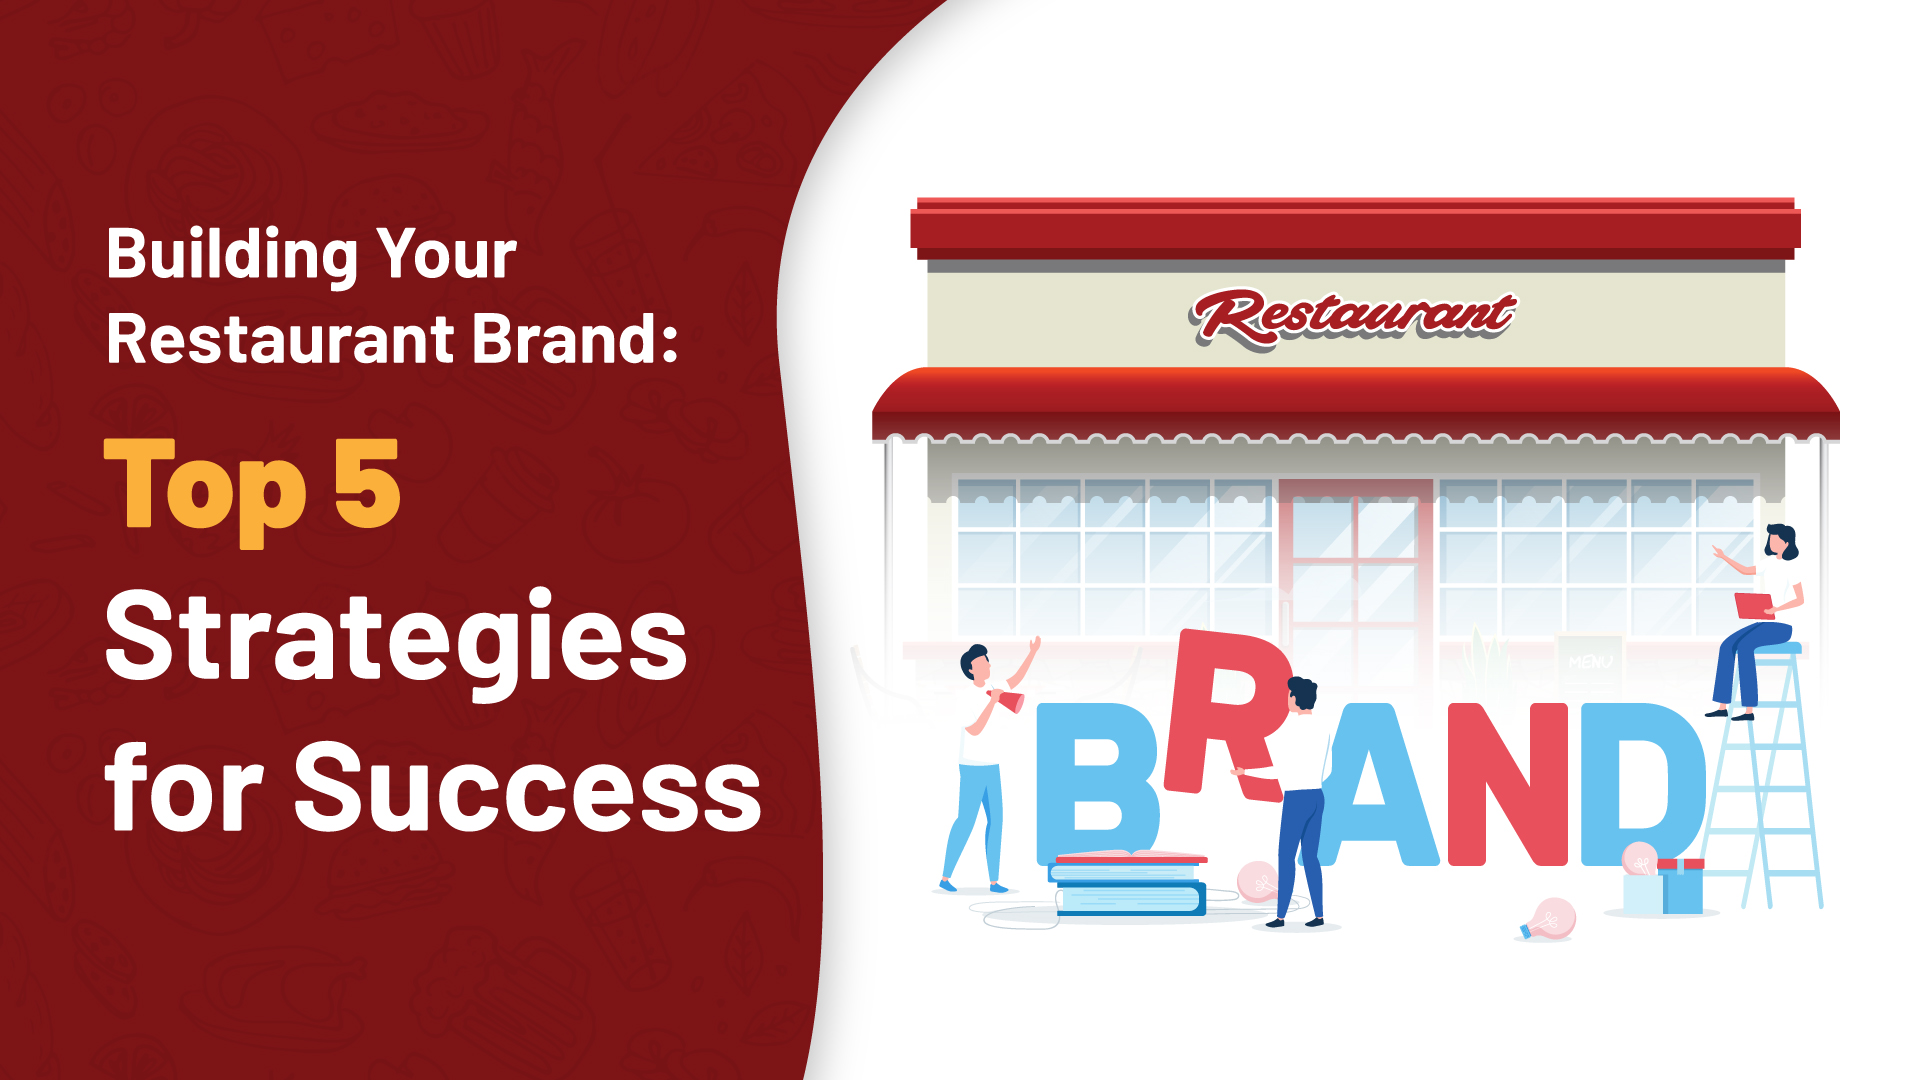 Top 5 Strategies for Building Your Restaurant Brand